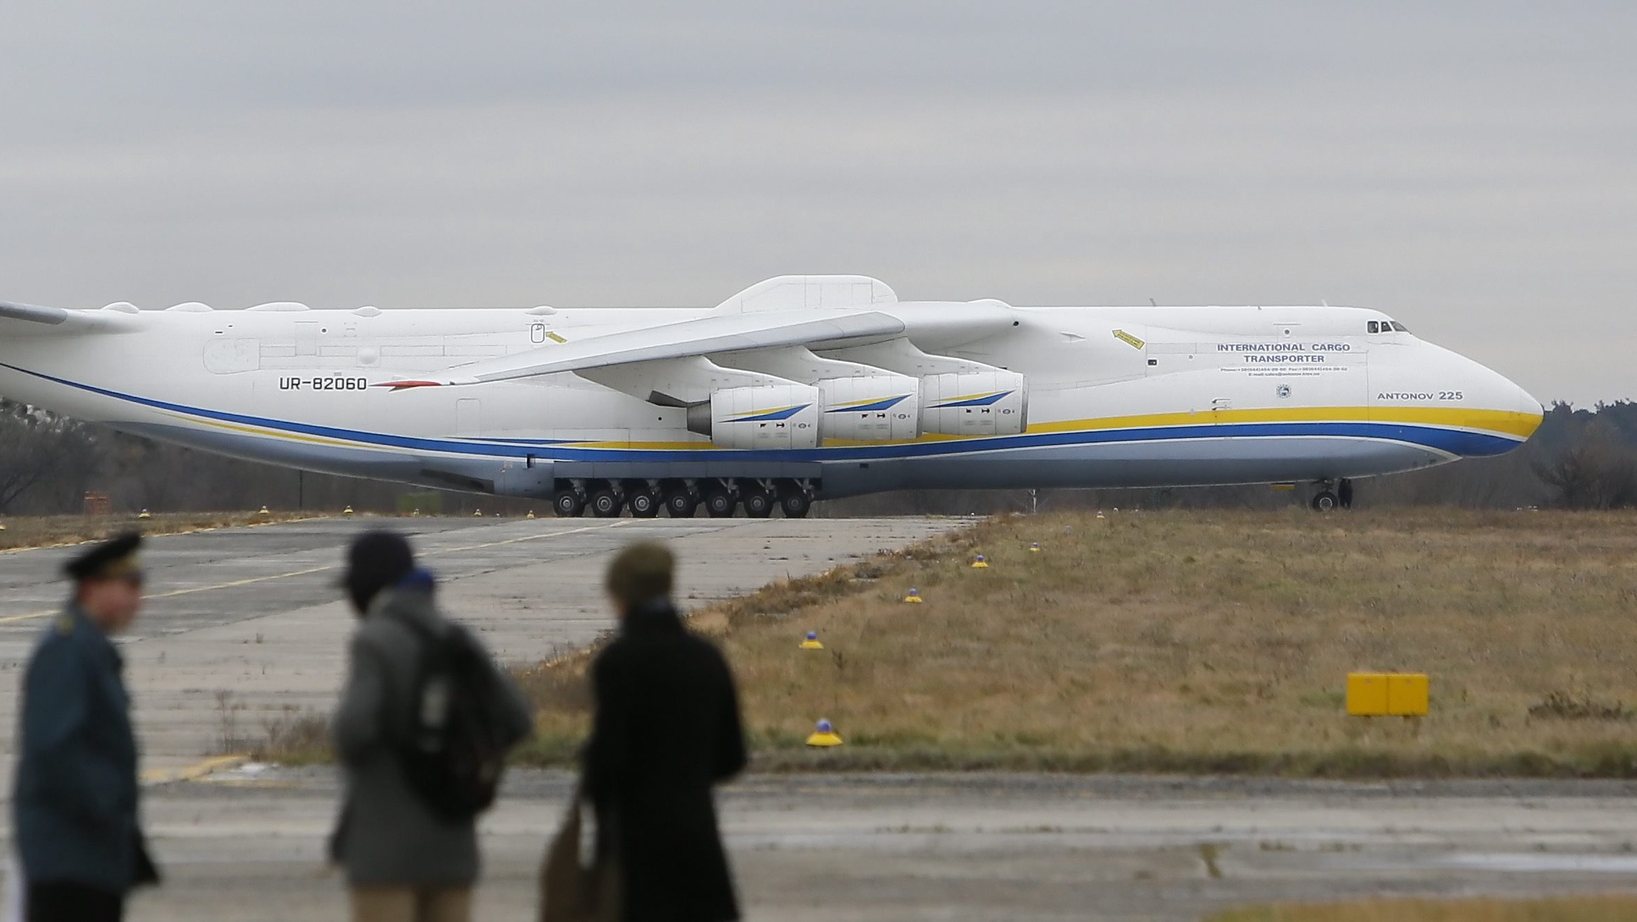 epa05625527 An Ukrainian Antonov An-225 &#039;Mriya&#039; (Dream) aircraft is prepared for takeoff from the Gostomel airport, near Kiev, Ukraine, 10 November 2016. The giant transport plane will pick up a cargo in Germany city of Leipzig for further commercial flight. The Antonov An-225 &#039;Mriya&#039; is a strategic airlift cargo aircraft which was originally designed in the 1980s in by the then Soviet Union&#039;s Antonov Design Bureau. Antonov An-225 aircraft, the only flying plane of its kind and longest and heaviest airplane ever built, is powered by six engines and can take a cargo with a maximum weight of 640 tons.  EPA/SERGEY DOLZHENKO